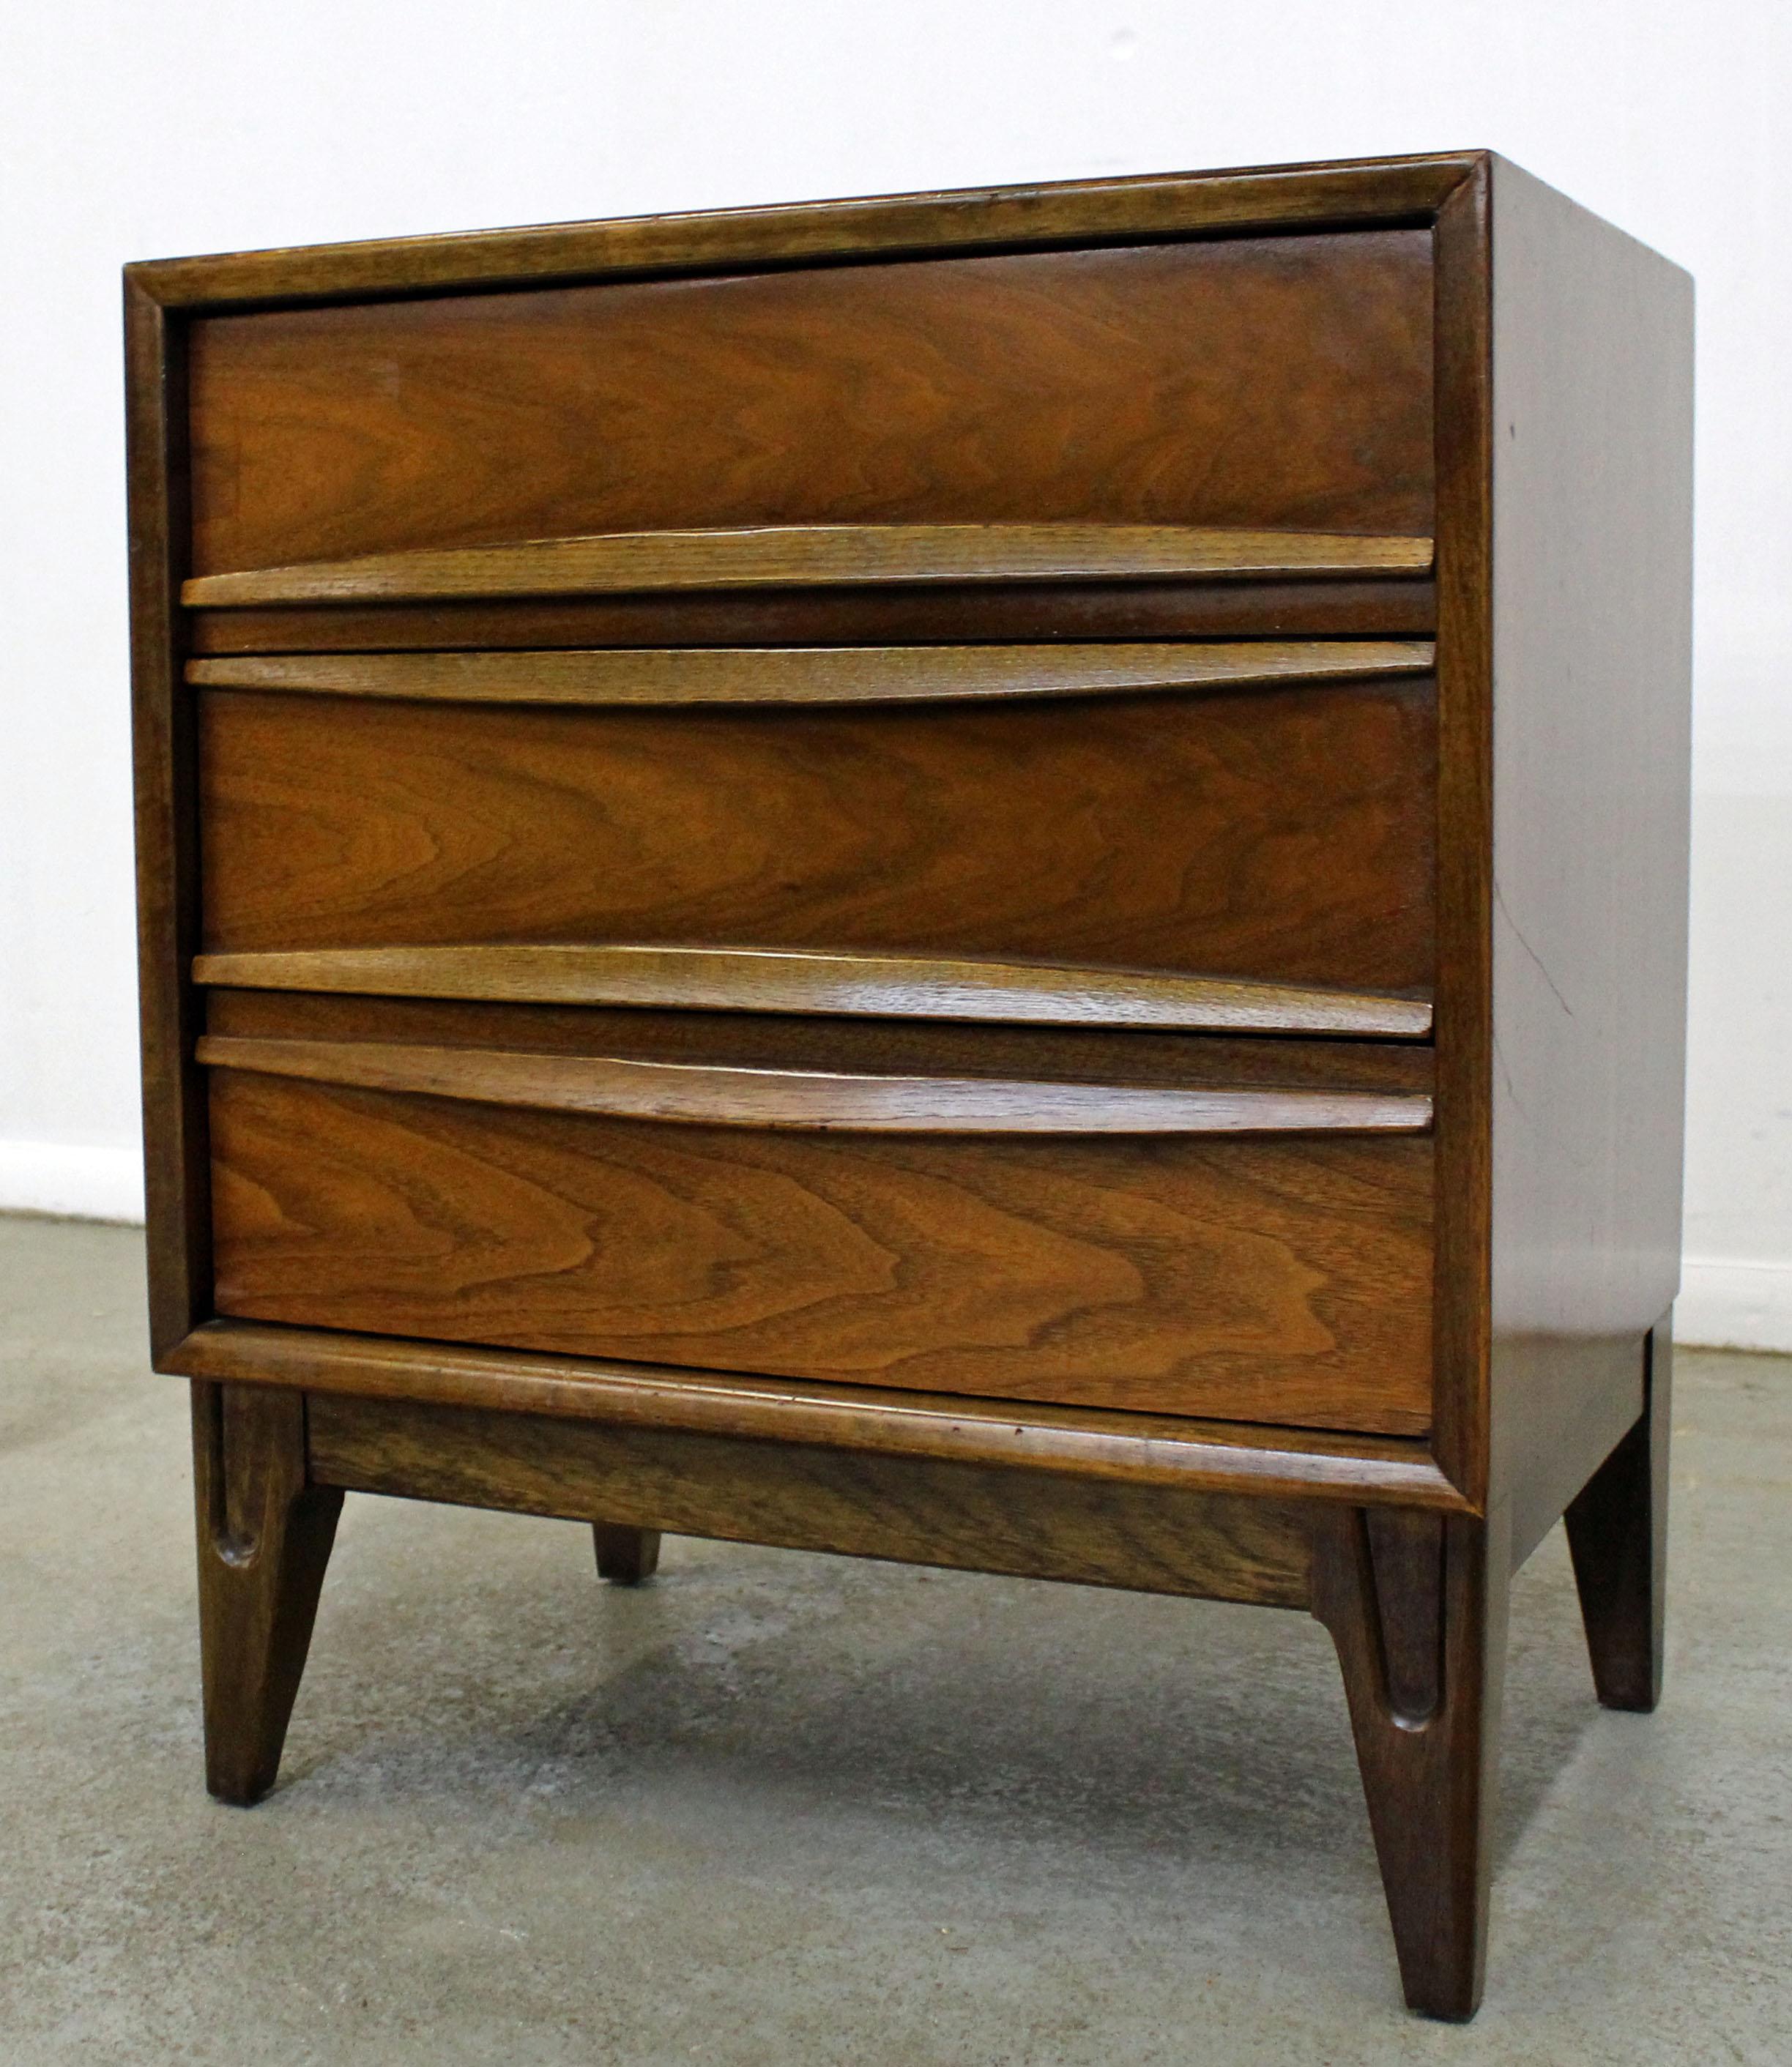 Offered is an excellent example of American Mid-Century Modern design. This is a single walnut nightstand with tapered legs, three dovetailed drawers, and sculpted pulls. It is in good condition, showing some age wear. It is not signed. Check out